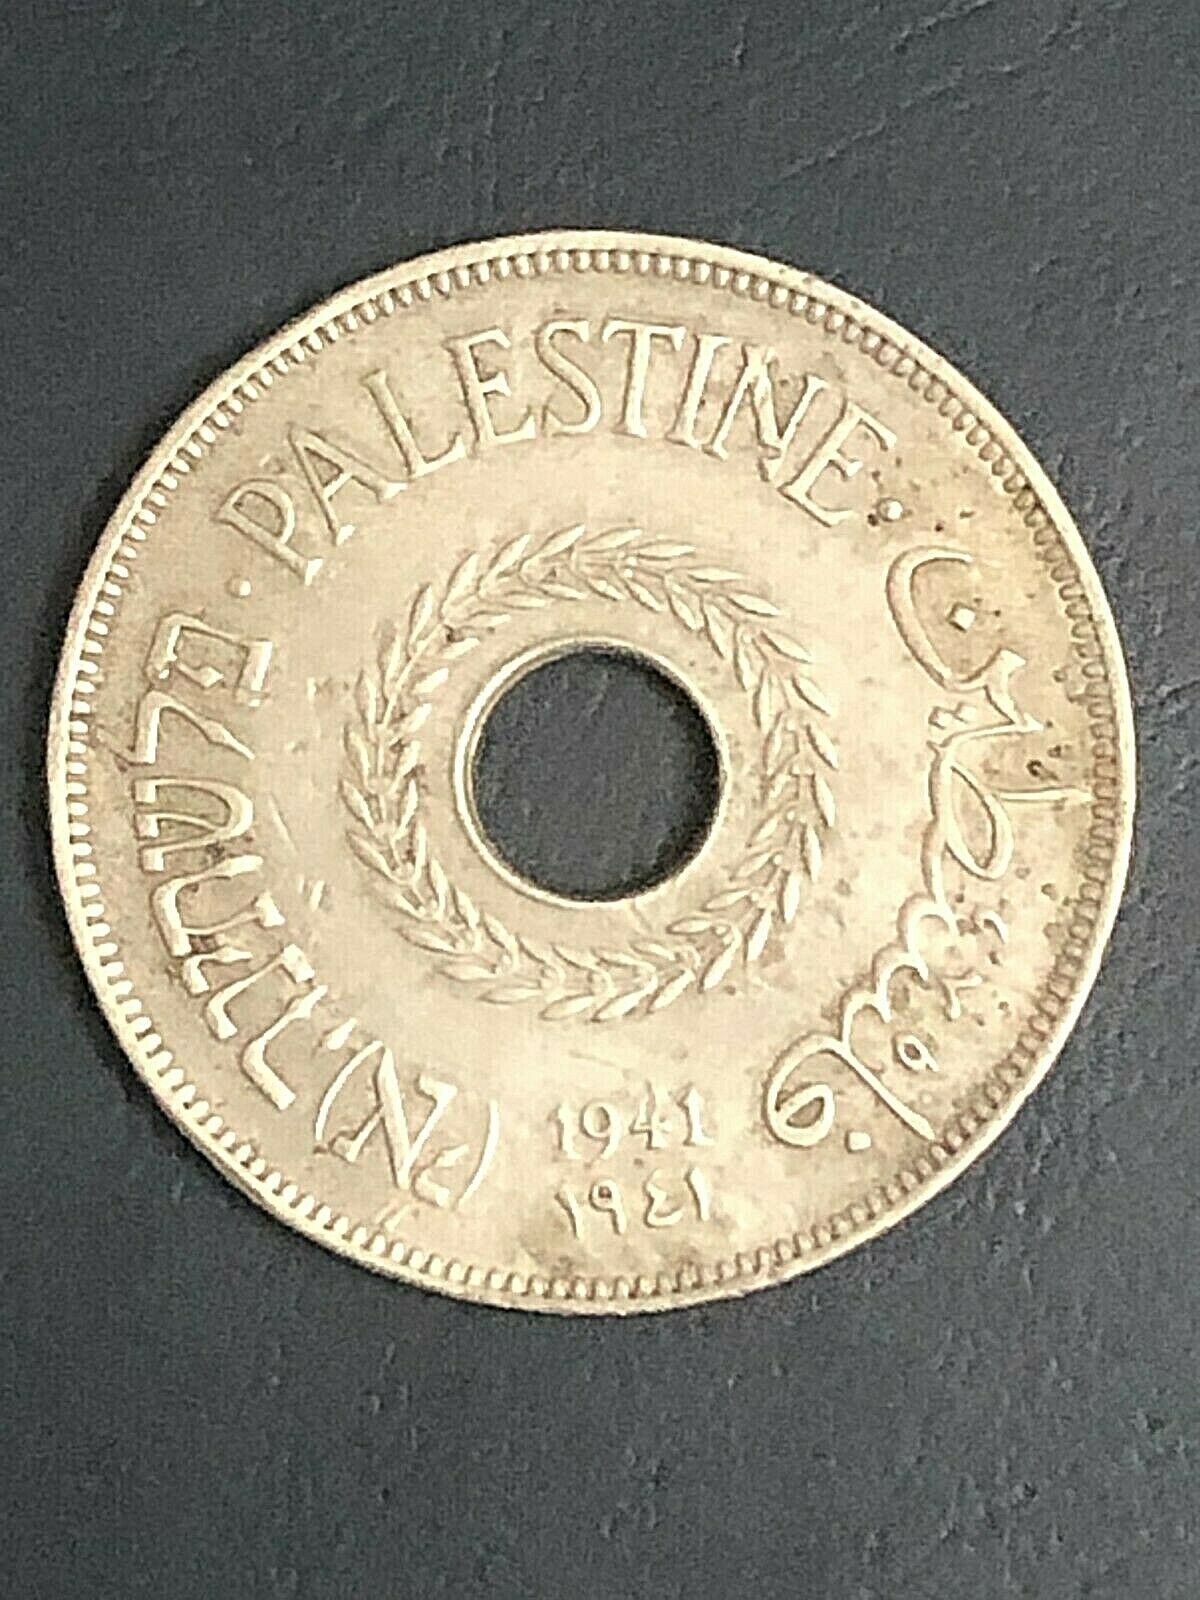 Palestine 20 Mils 1941, Key Date, Only 100,000 Minted, Most Rare